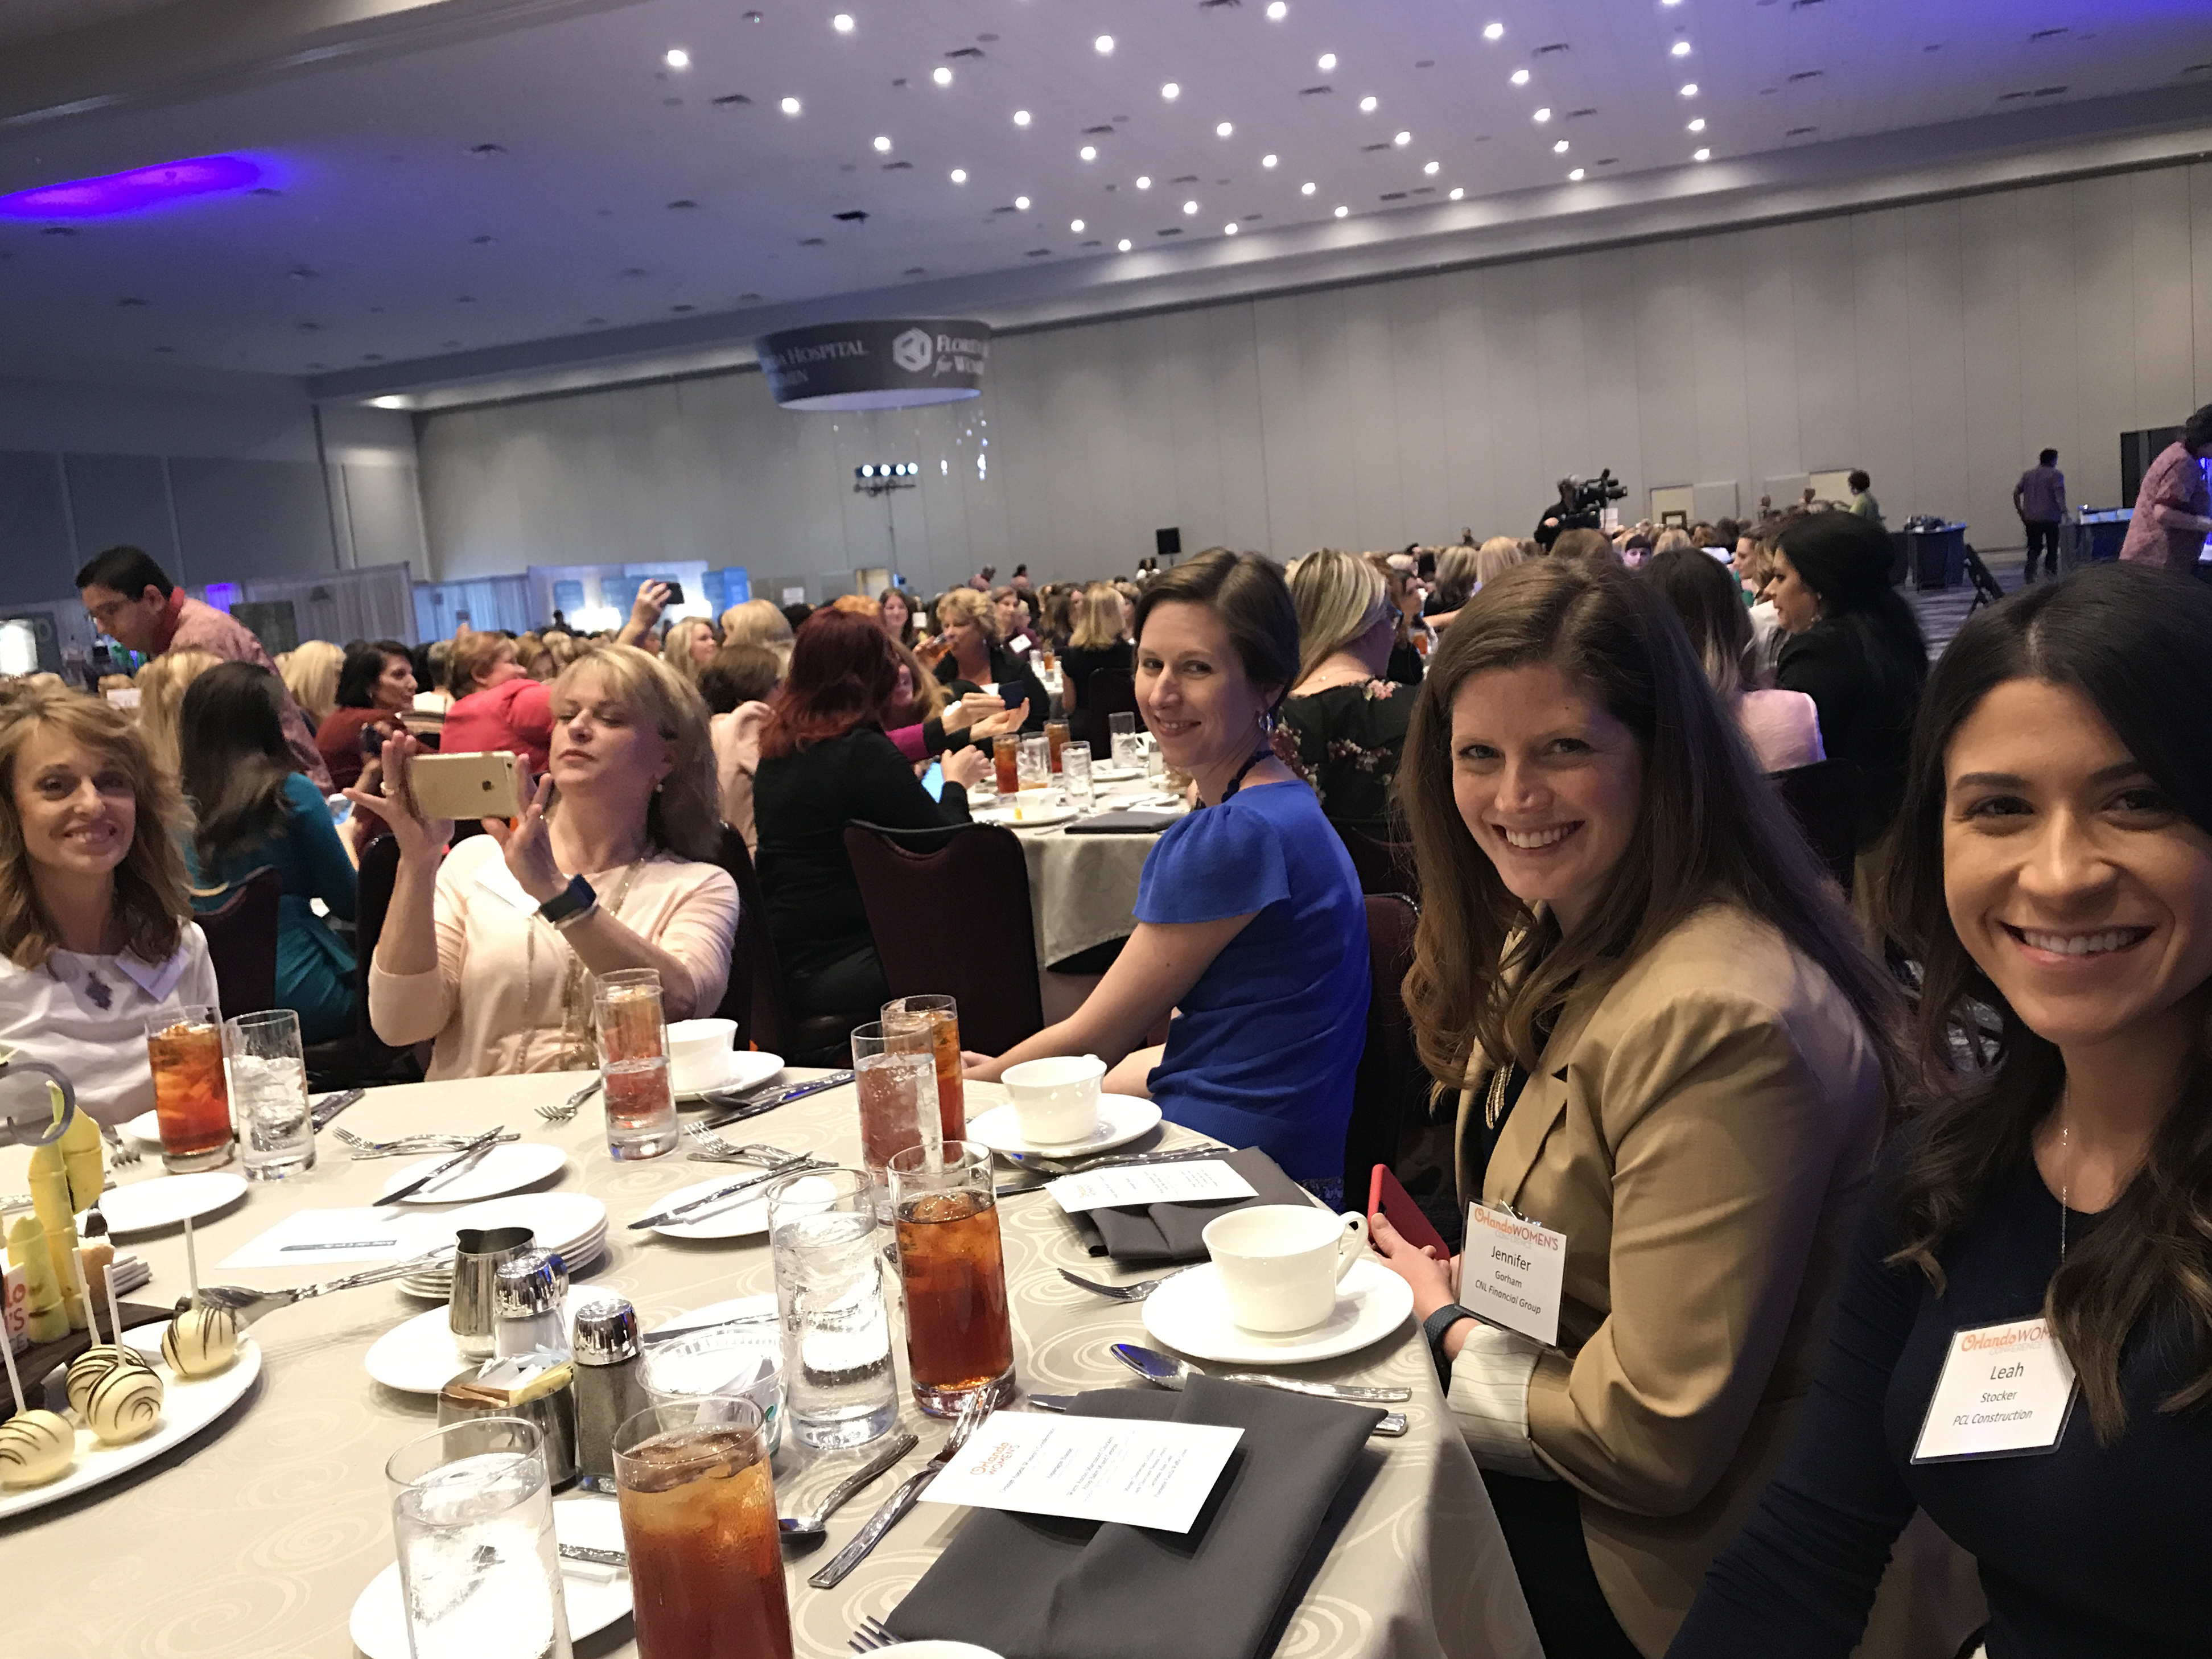 2018 Orlando Women's Conference guests